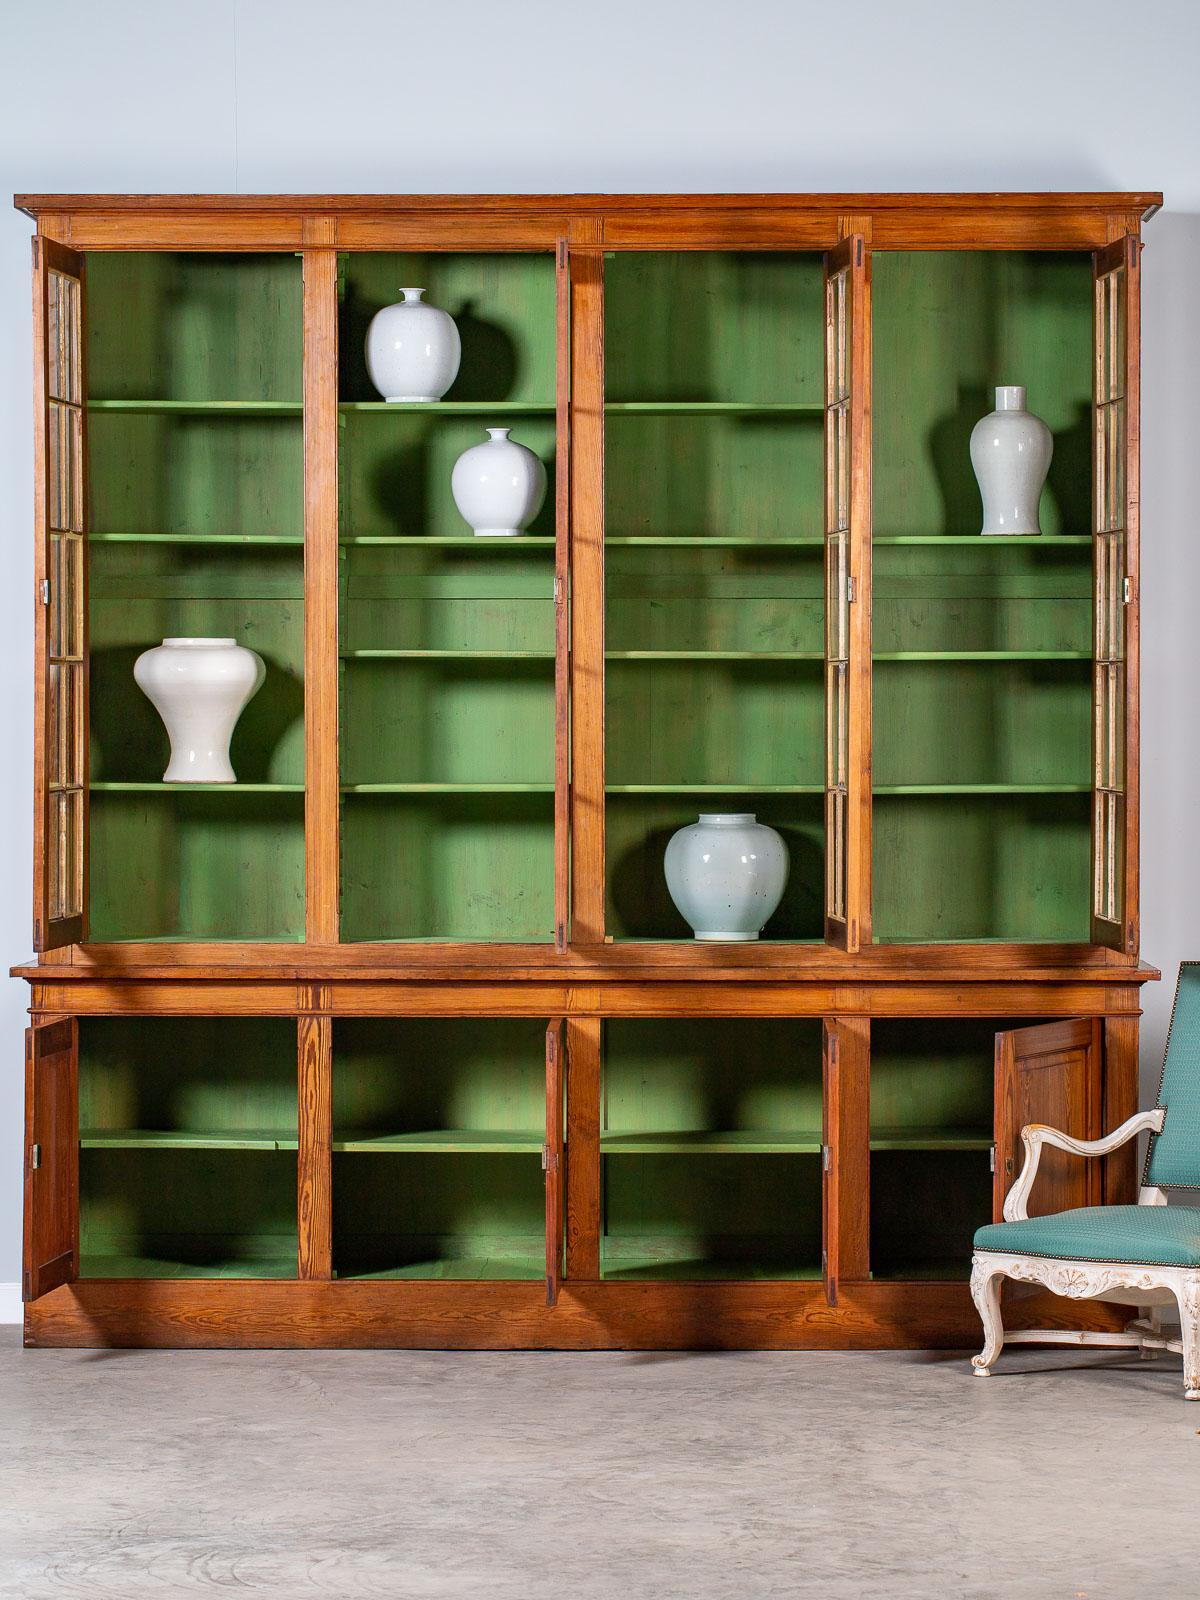 French Provincial Enormous Antique French Pine Bibliothèque Bookcase Display Cabinet, circa 1850